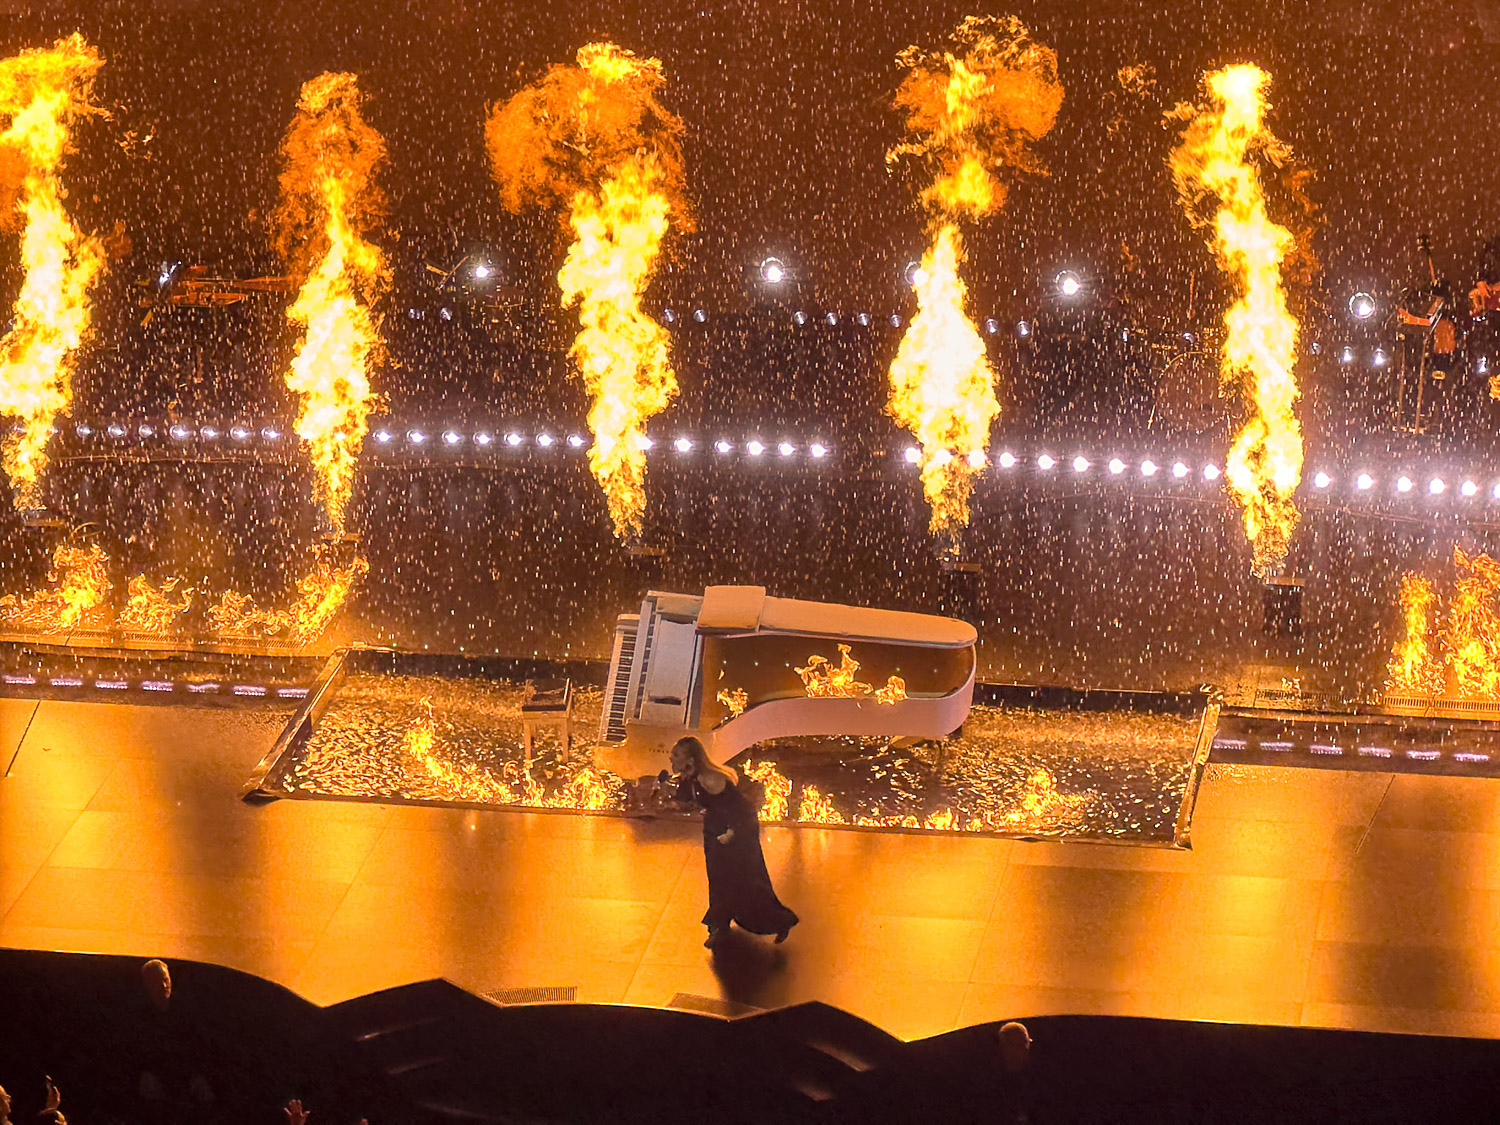 Adele performs fire and rain as fire shoots up on stage in Las Vegas.